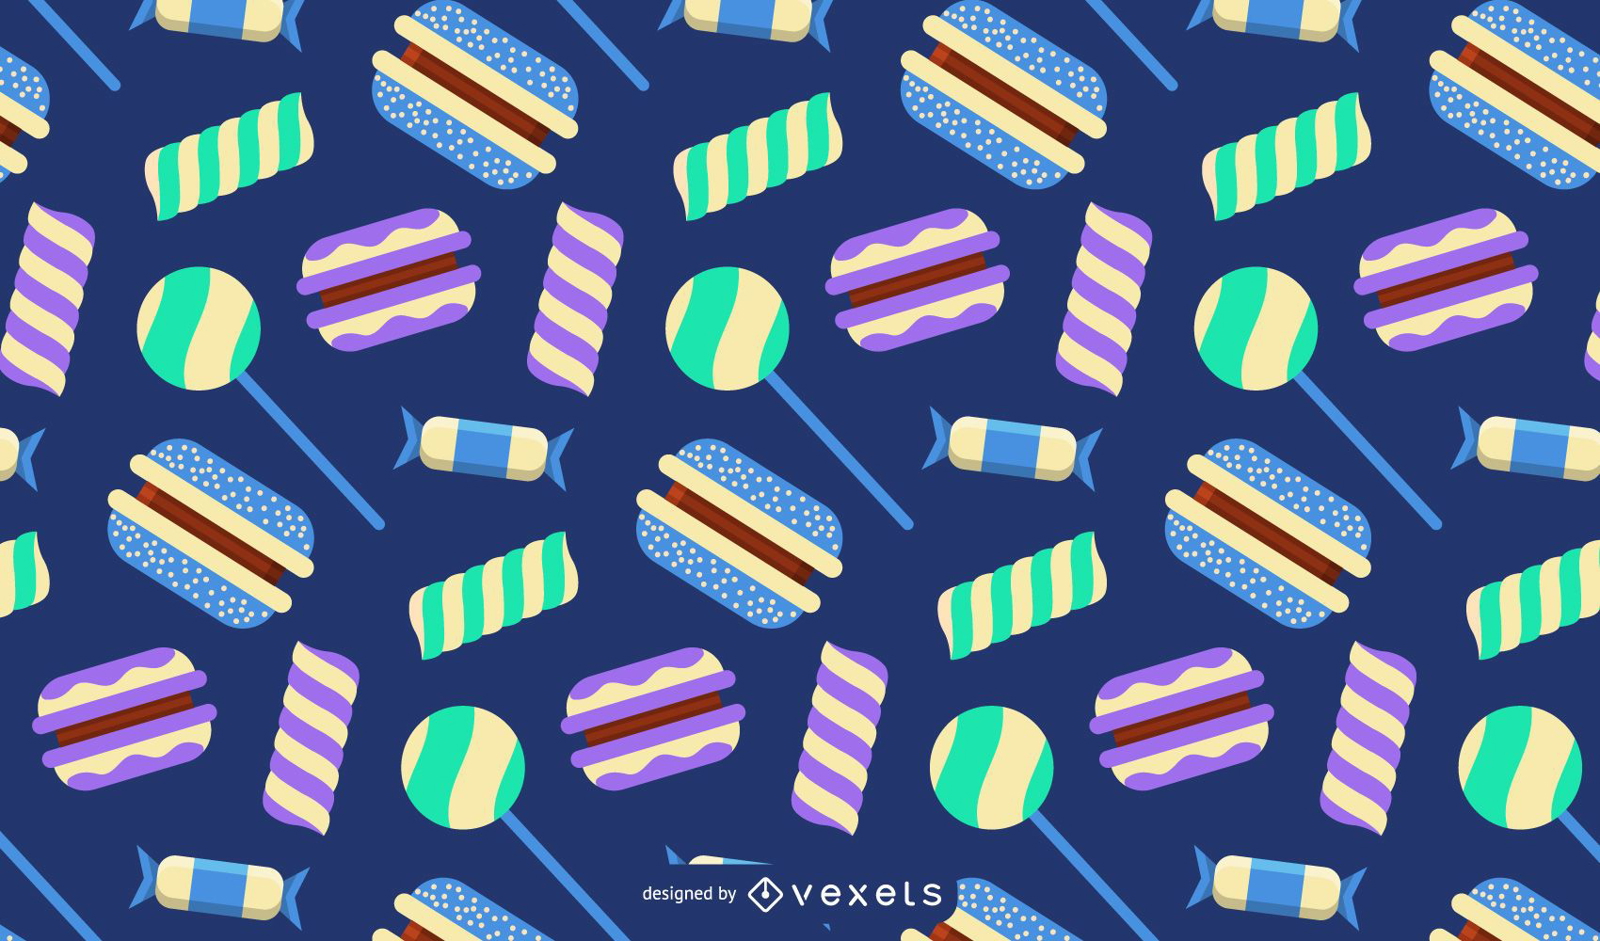 Sweets and candies pattern